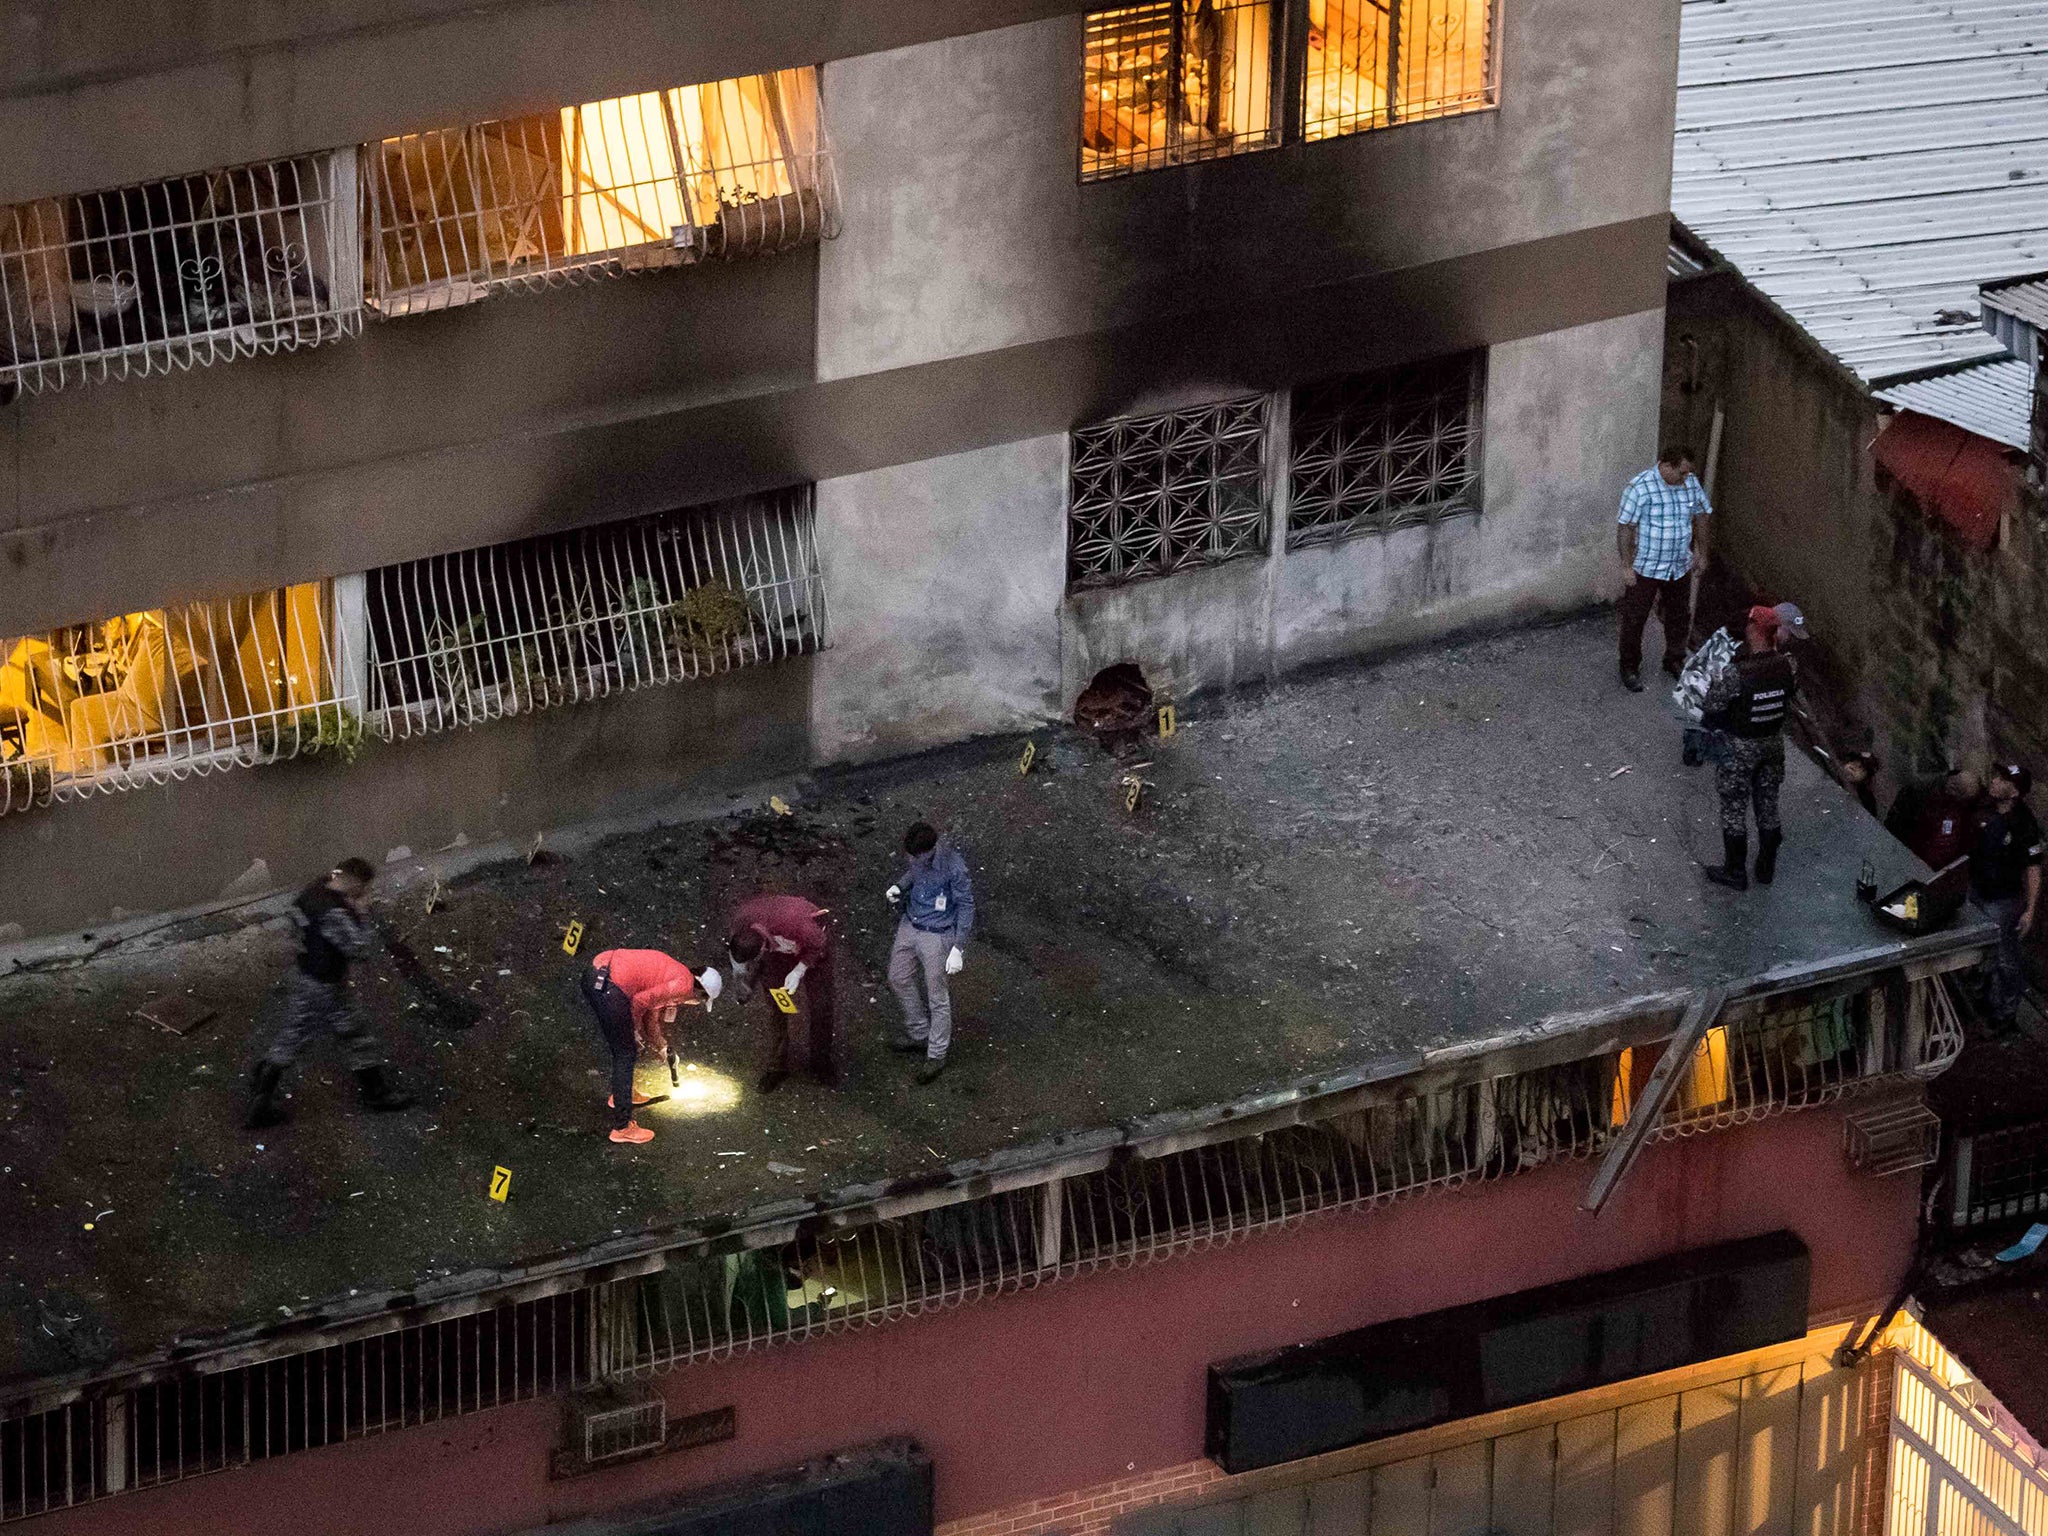 Security forces take evidence after an explosion via drone targeted Venezuelan President Nicolas Maduro in Caracas